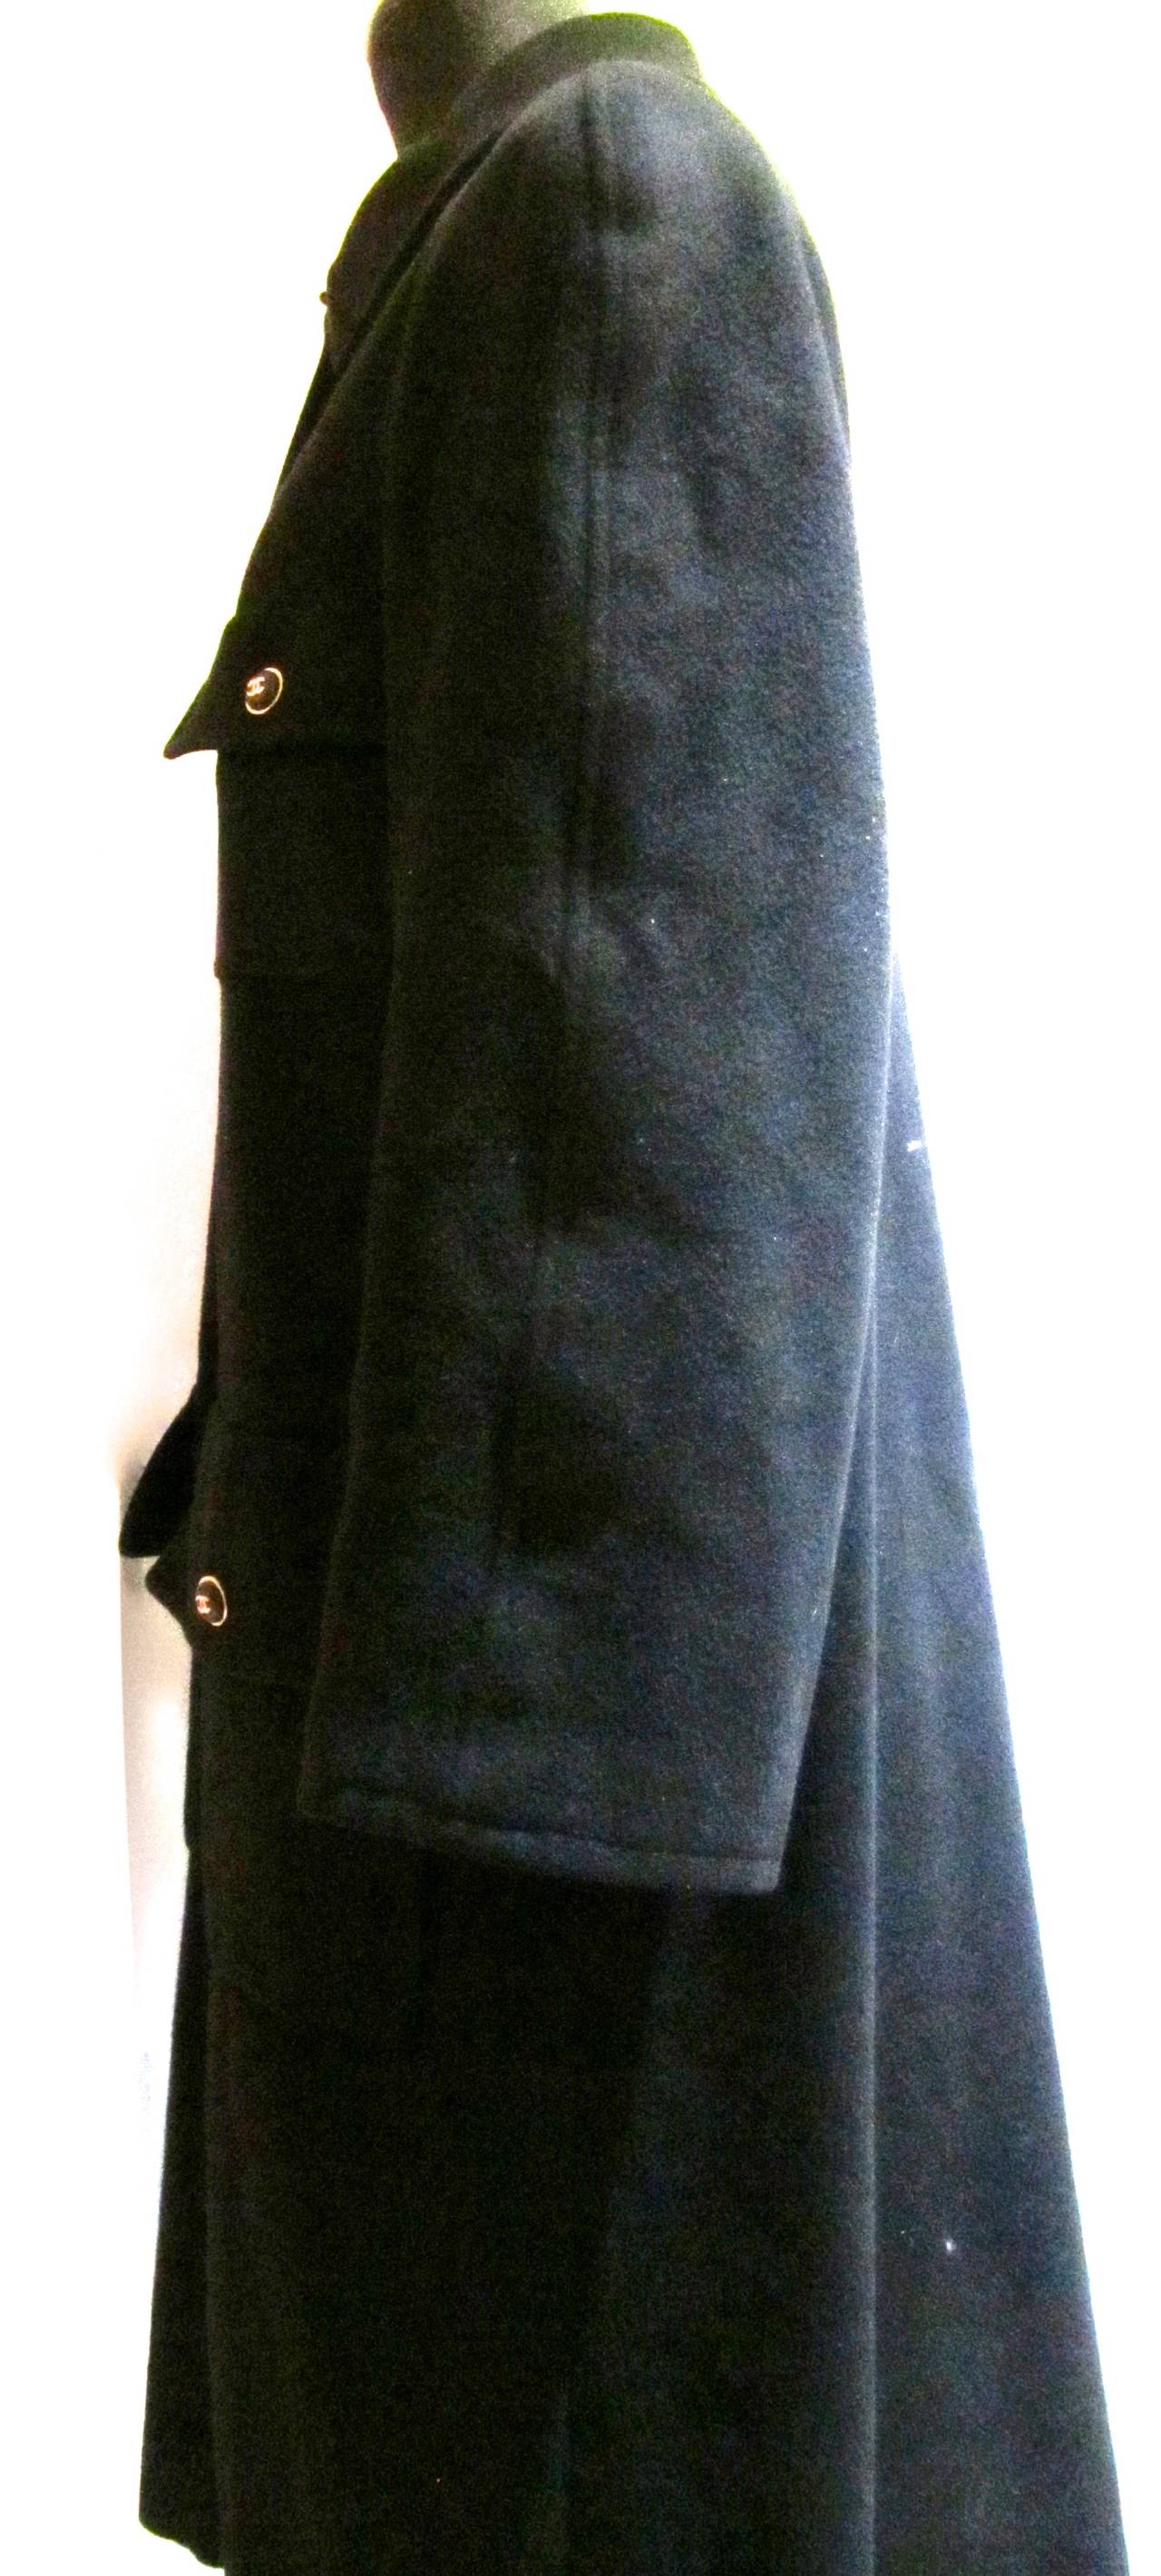 Beautiful 100% black cashmere Chanel coat from Fall of '95. Looks as current today as it did when it was first released. Chanel boutique 100% black cashmere lined in silk. Has size listed as 36 but fits more like a size 40. Many of the winter coats